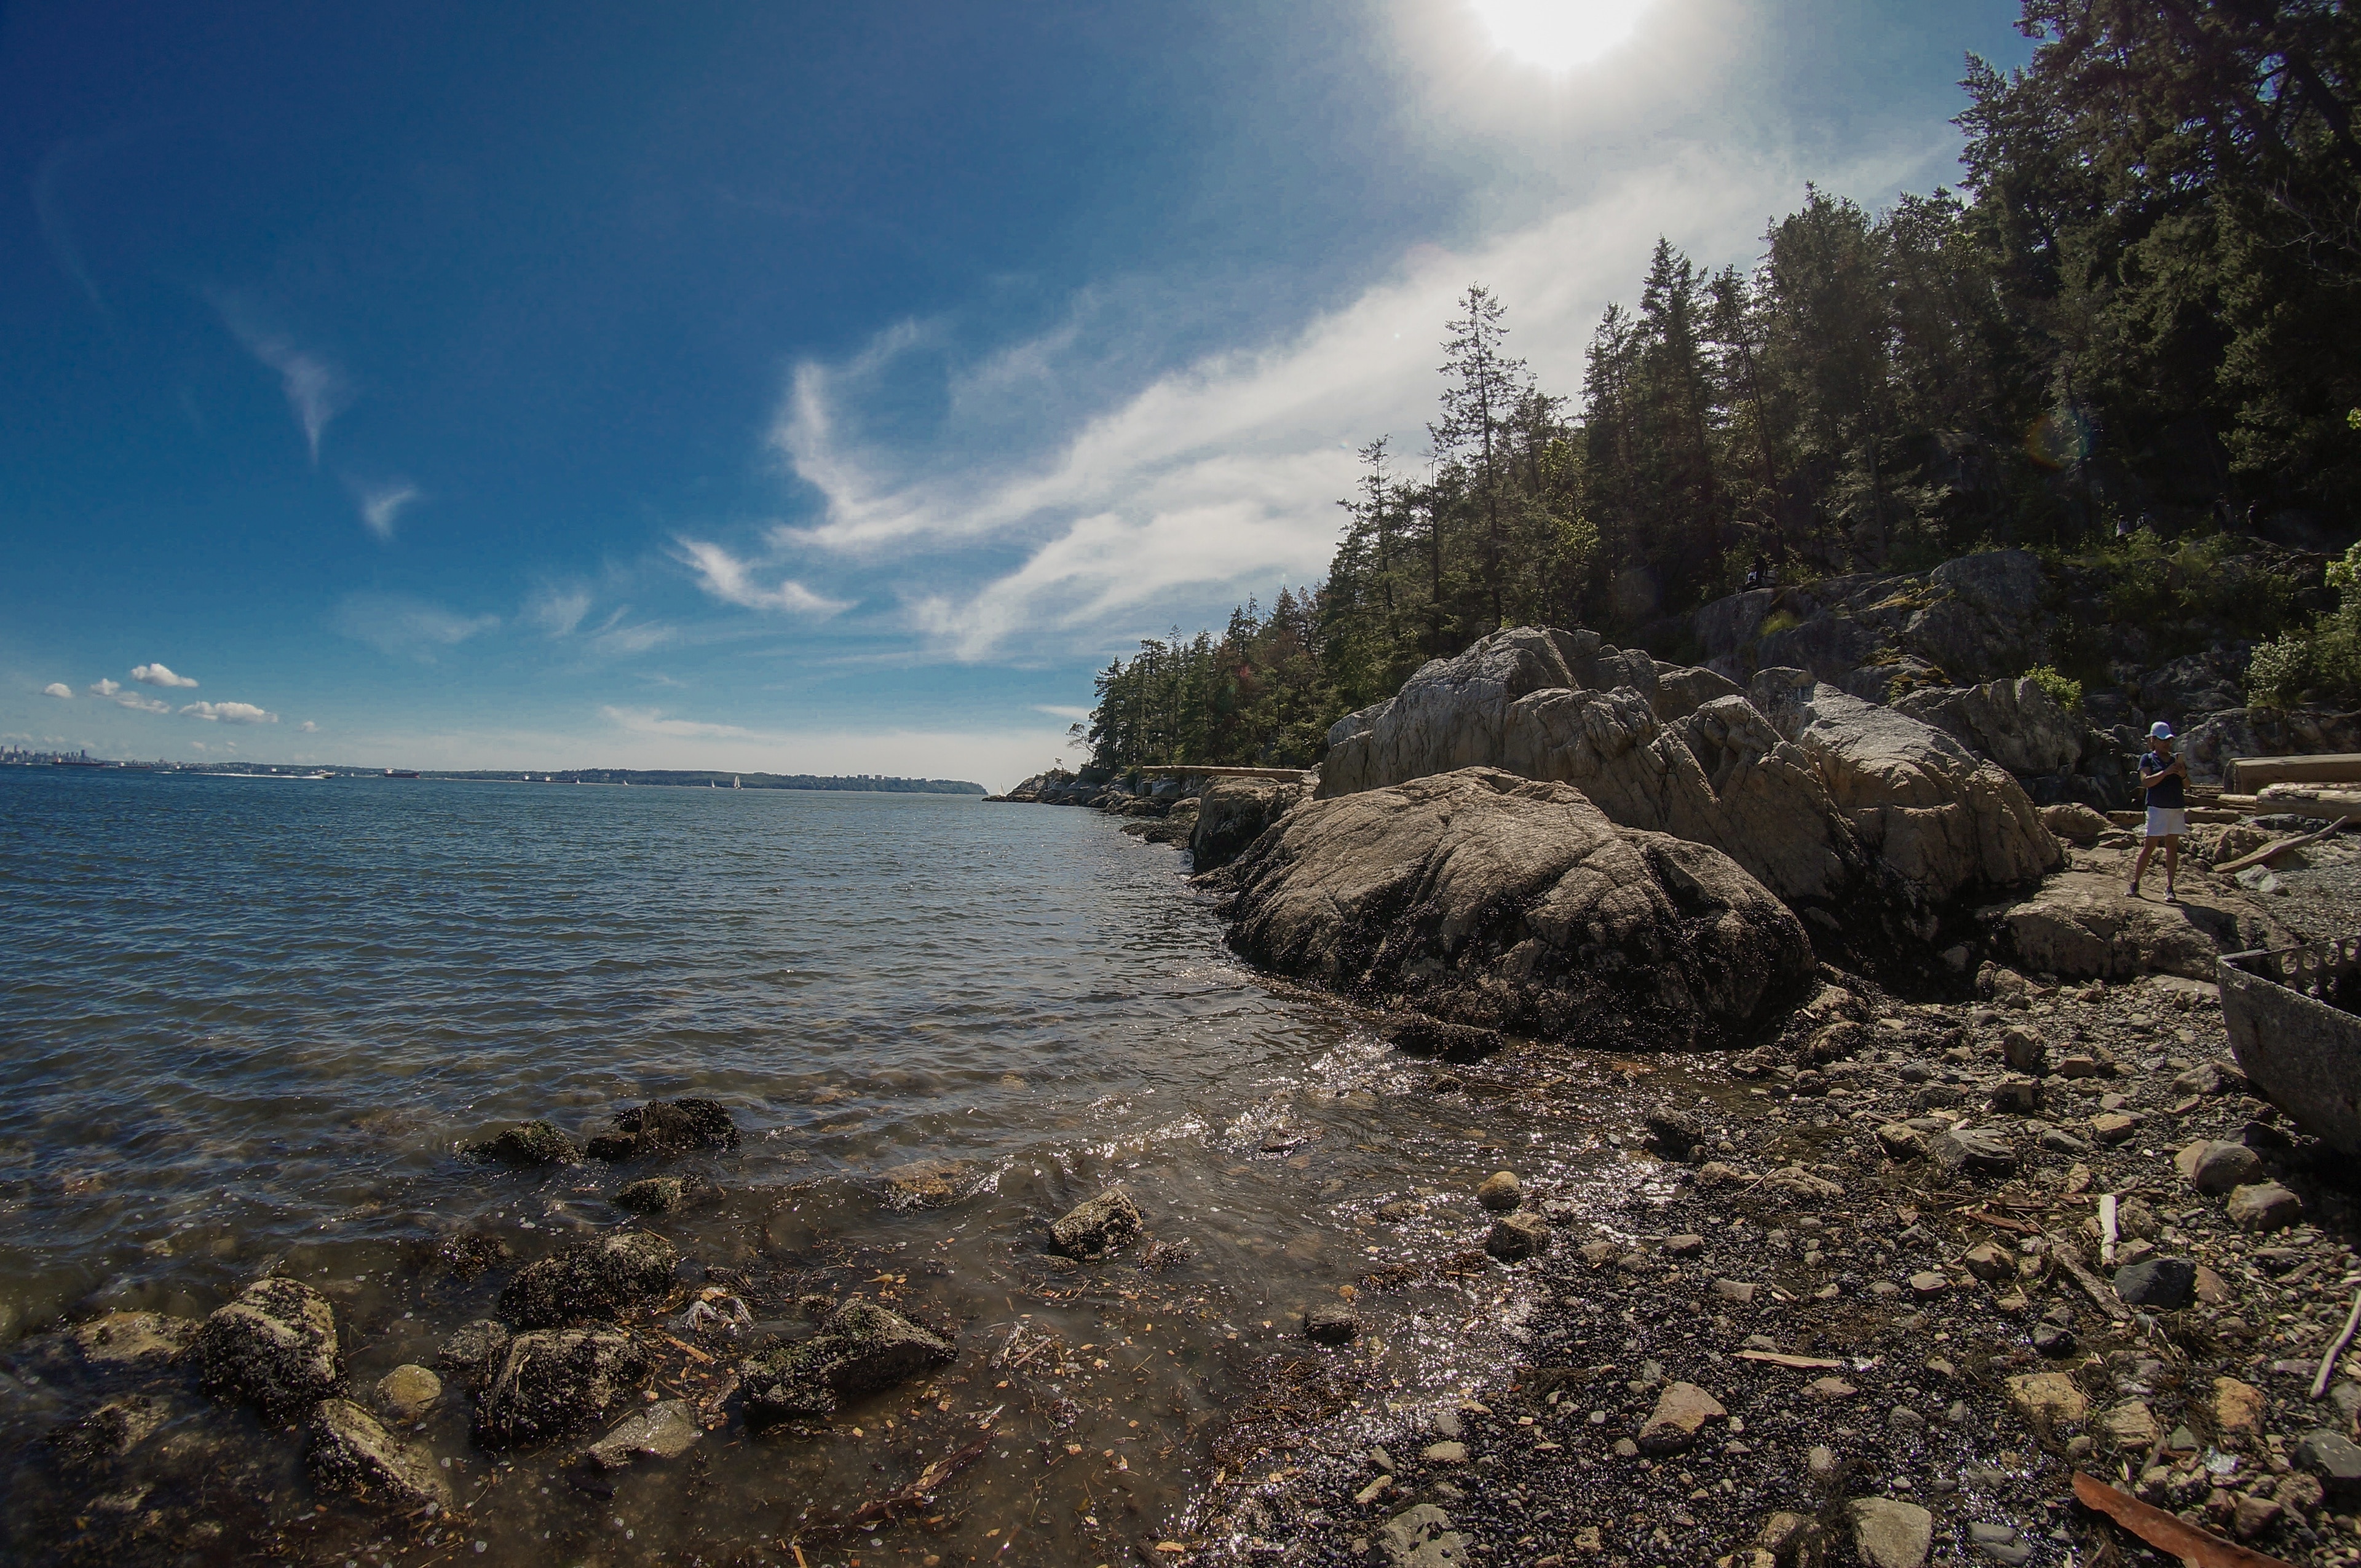 Starboat Cove at Lighthouse Park West Vancouver,  BC, Canada

#starboatcove #westvan #lighthousepark